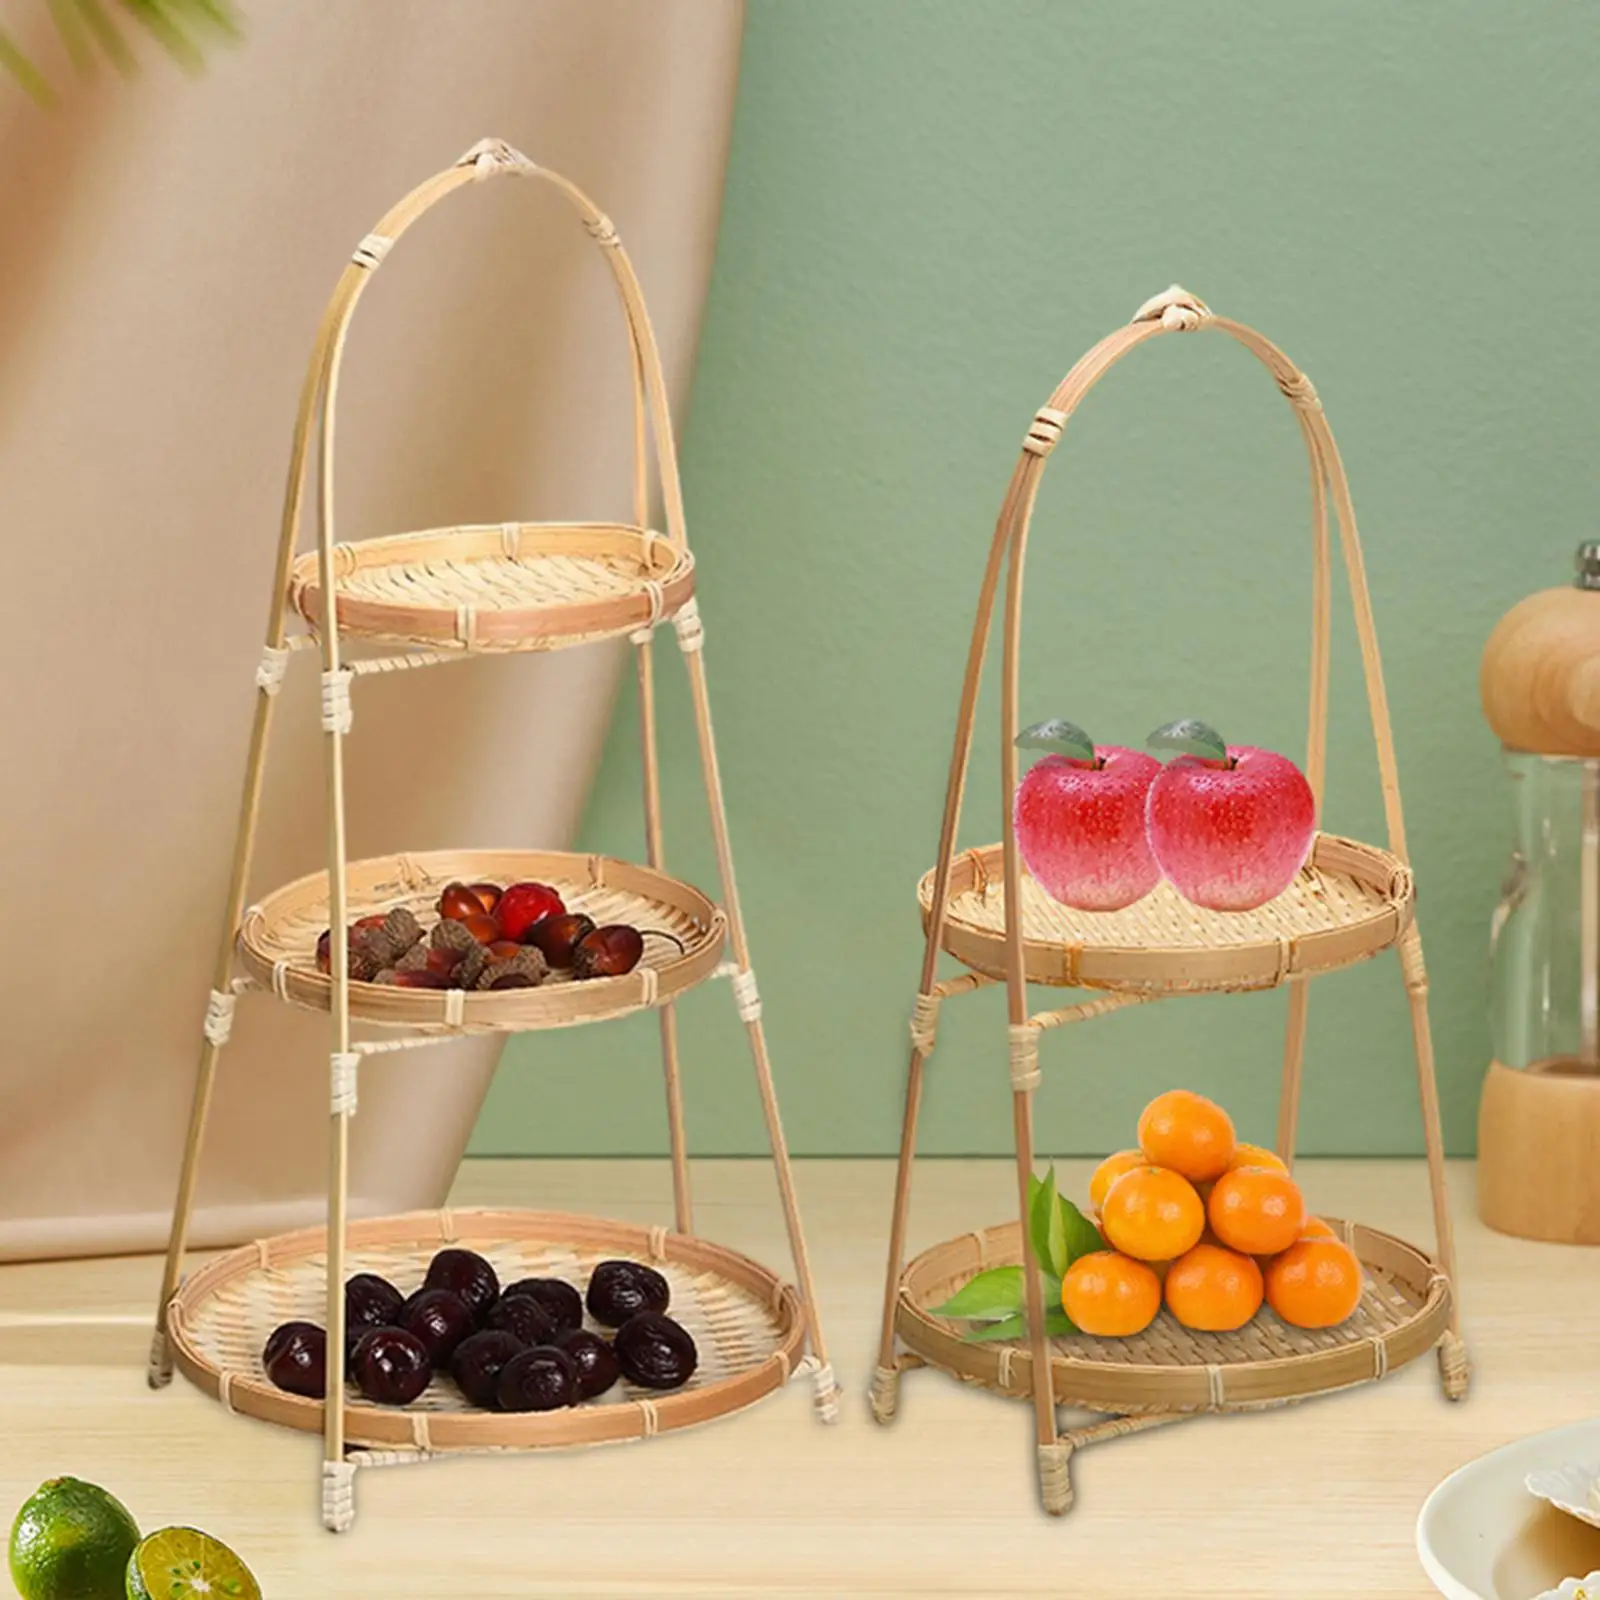 Handwoven Fruit Basket Decoration Bamboo Fruit Basket Serving Trays Snack Tray for Kitchen Home Restaurant Table Dining Room